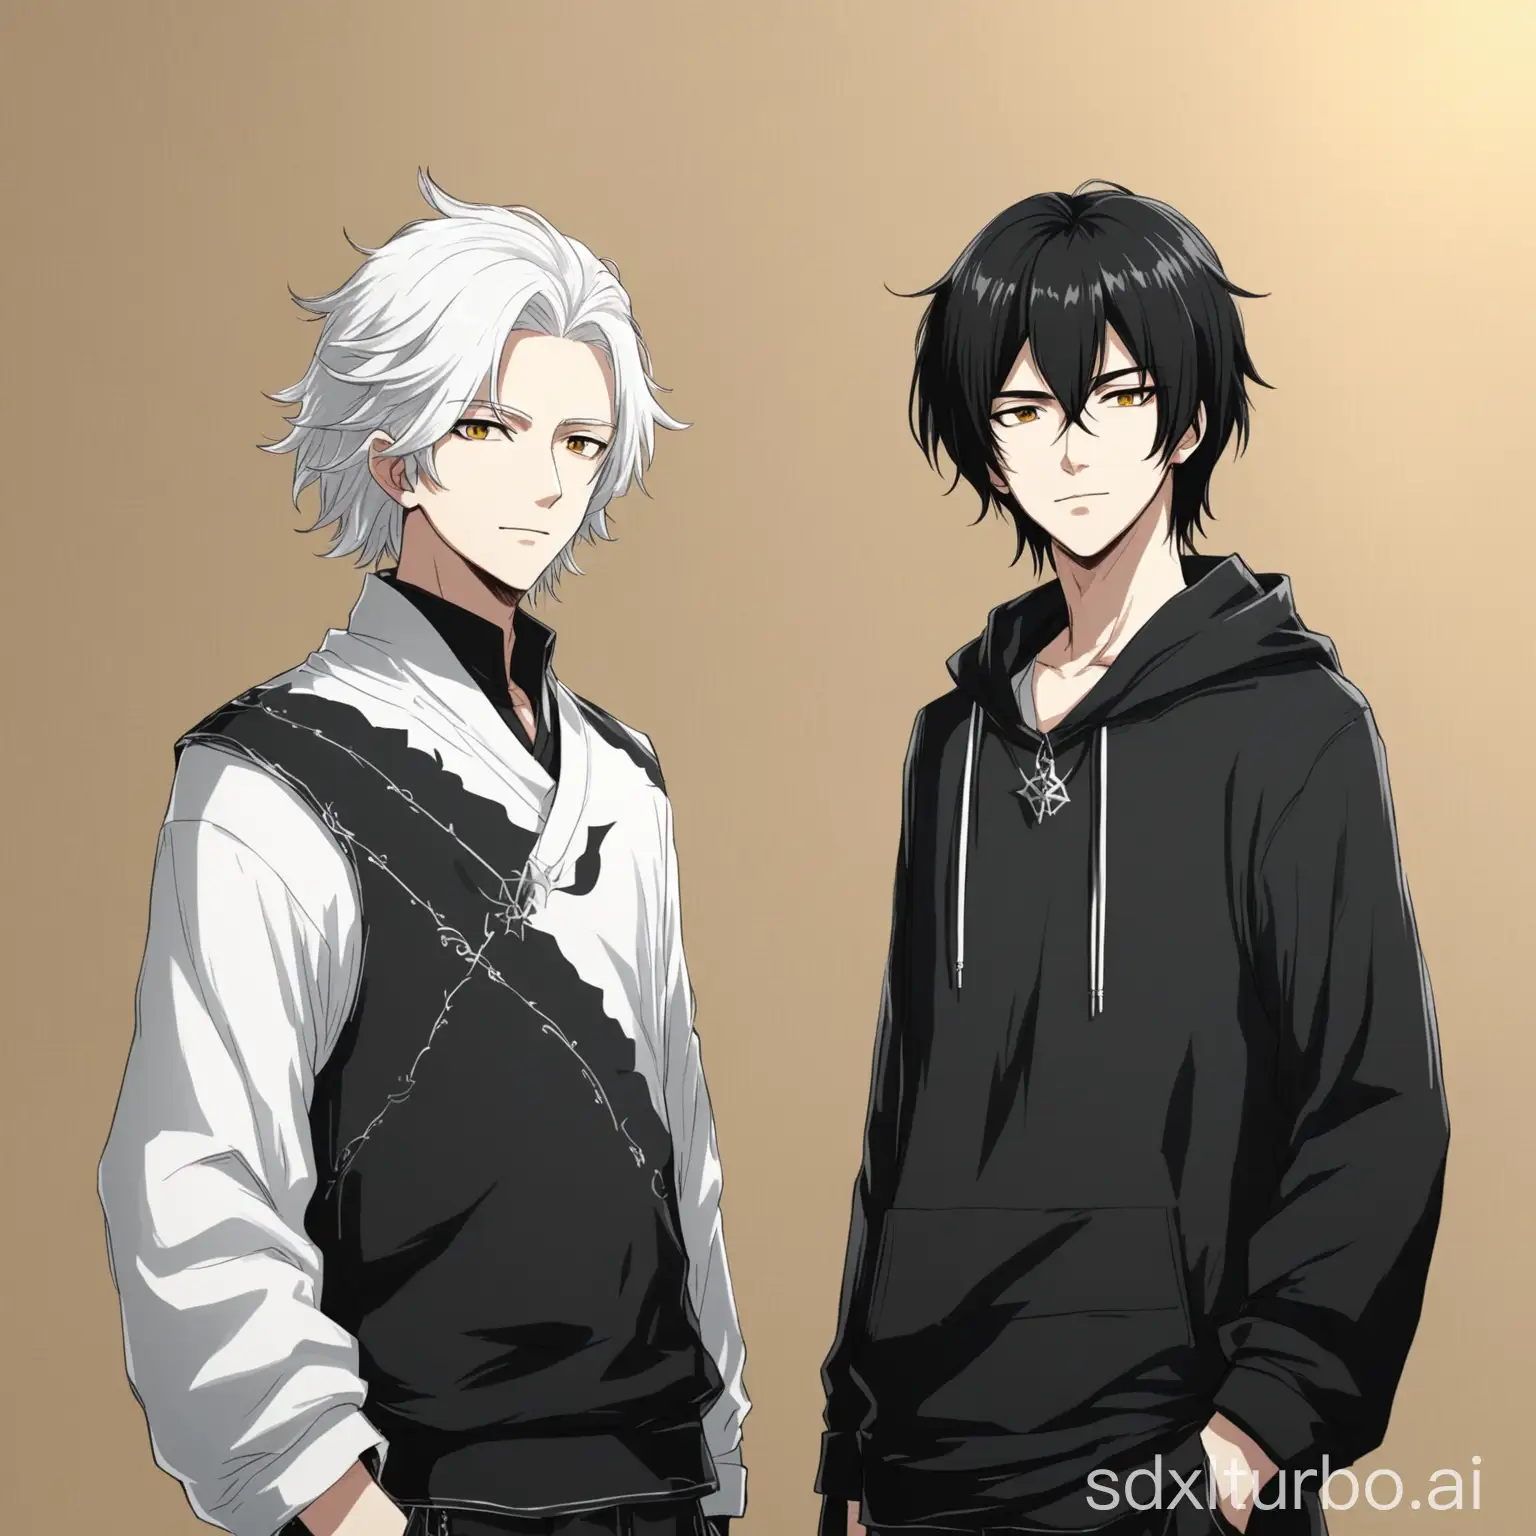 Two young men, one cool white-haired, one sunny black-haired. The white-haired is taller than the black-haired. In Fan Sister Song's style. The two are ambiguous.